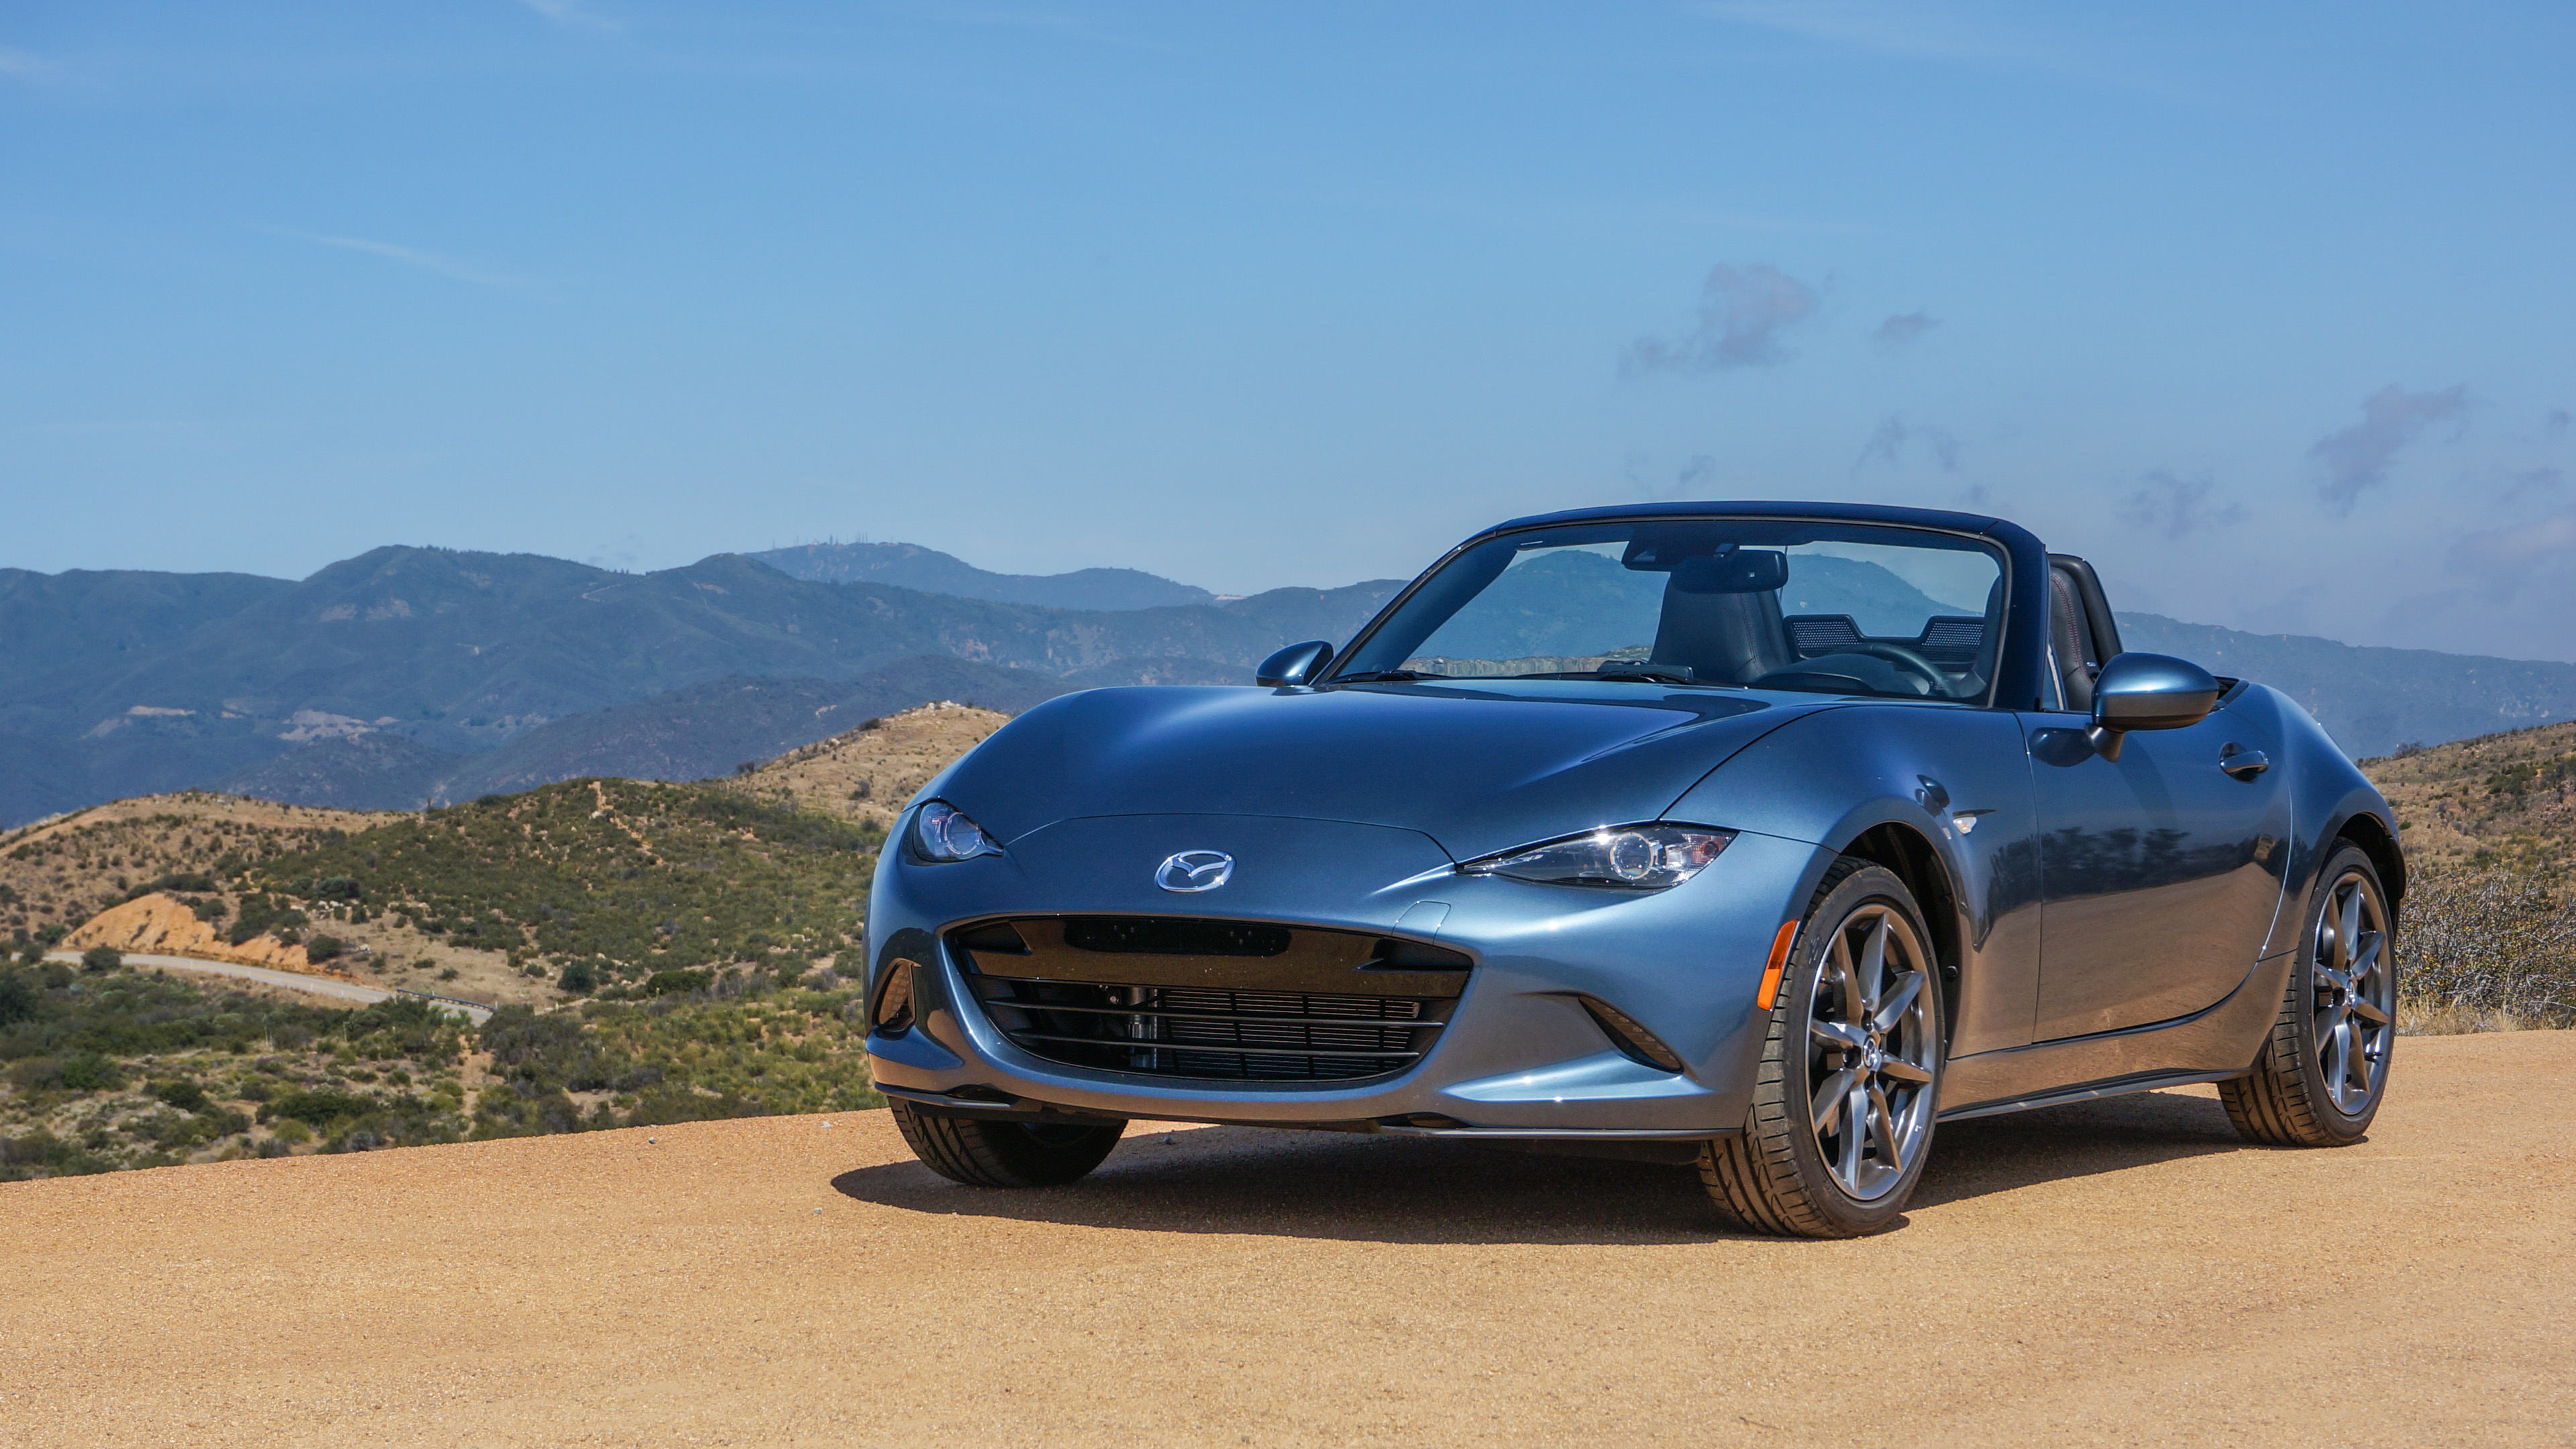 Mazda MX-5, Driving joy personified, Performance-driven roadster, Ultimate driving experience, 3840x2160 4K Desktop